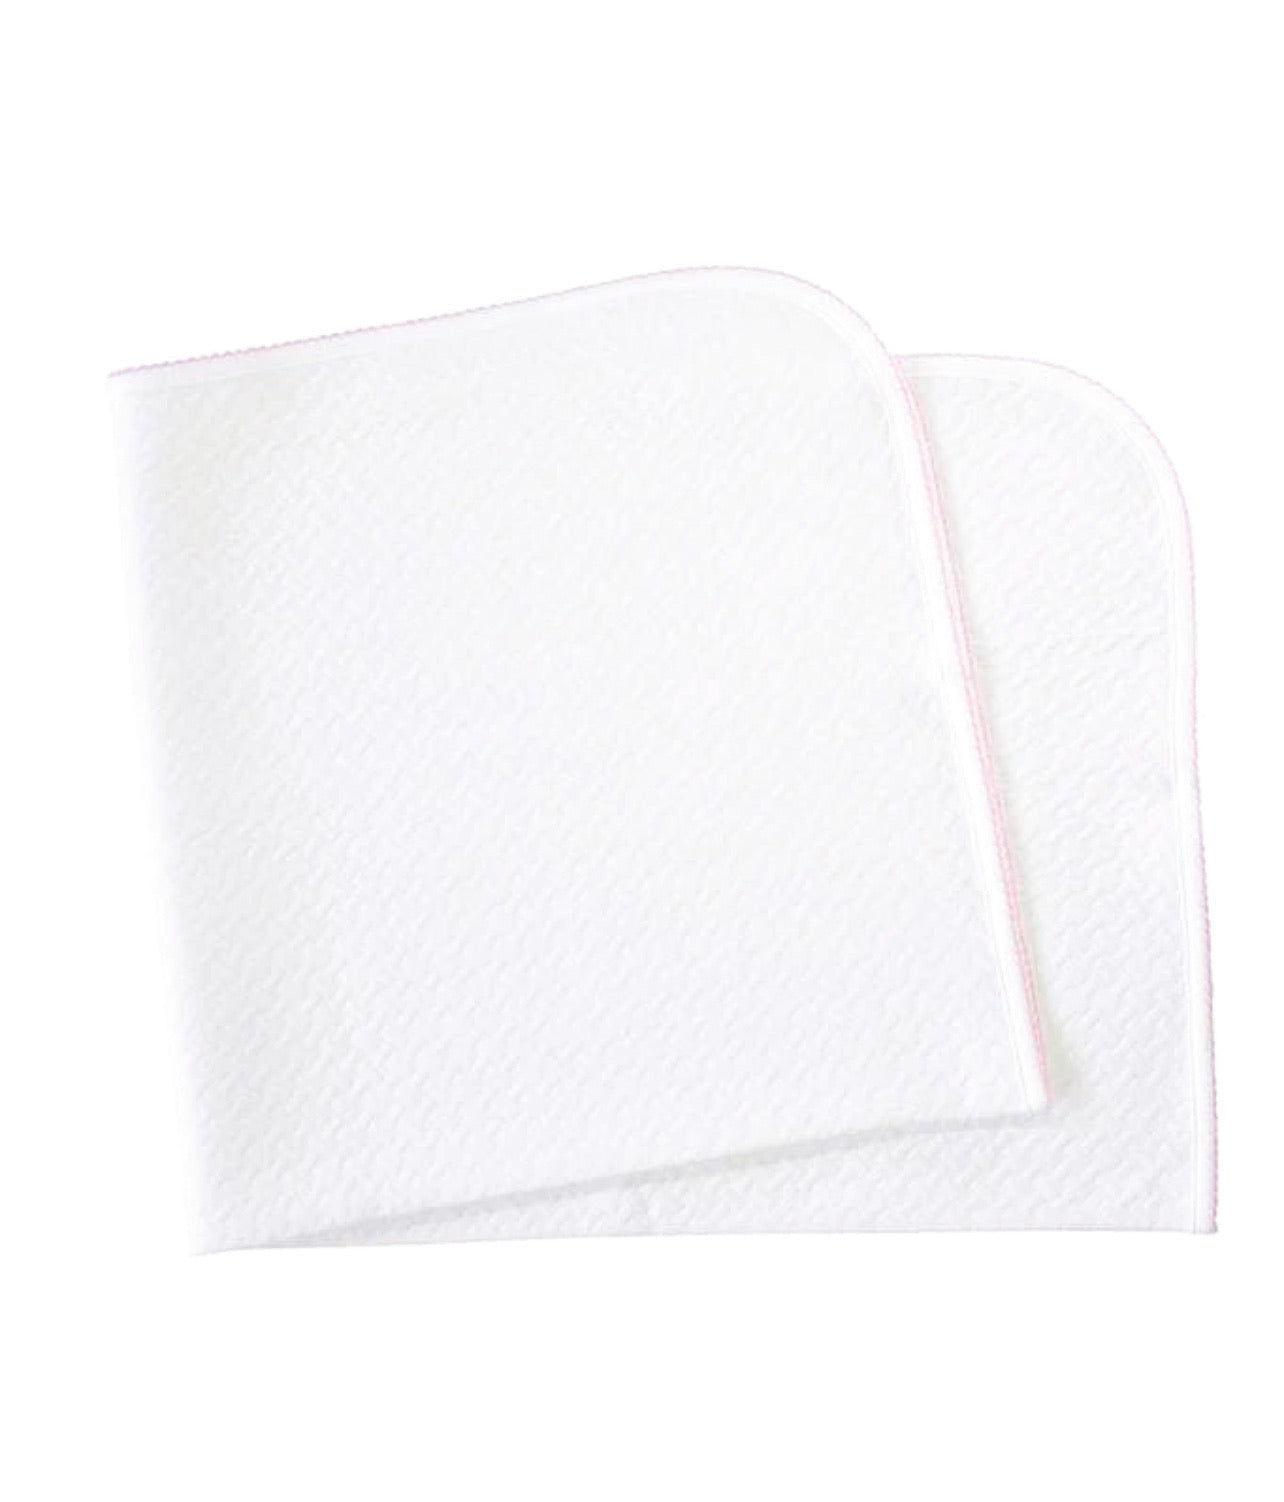 Quilted Pima Baby Blanket: White/Pink